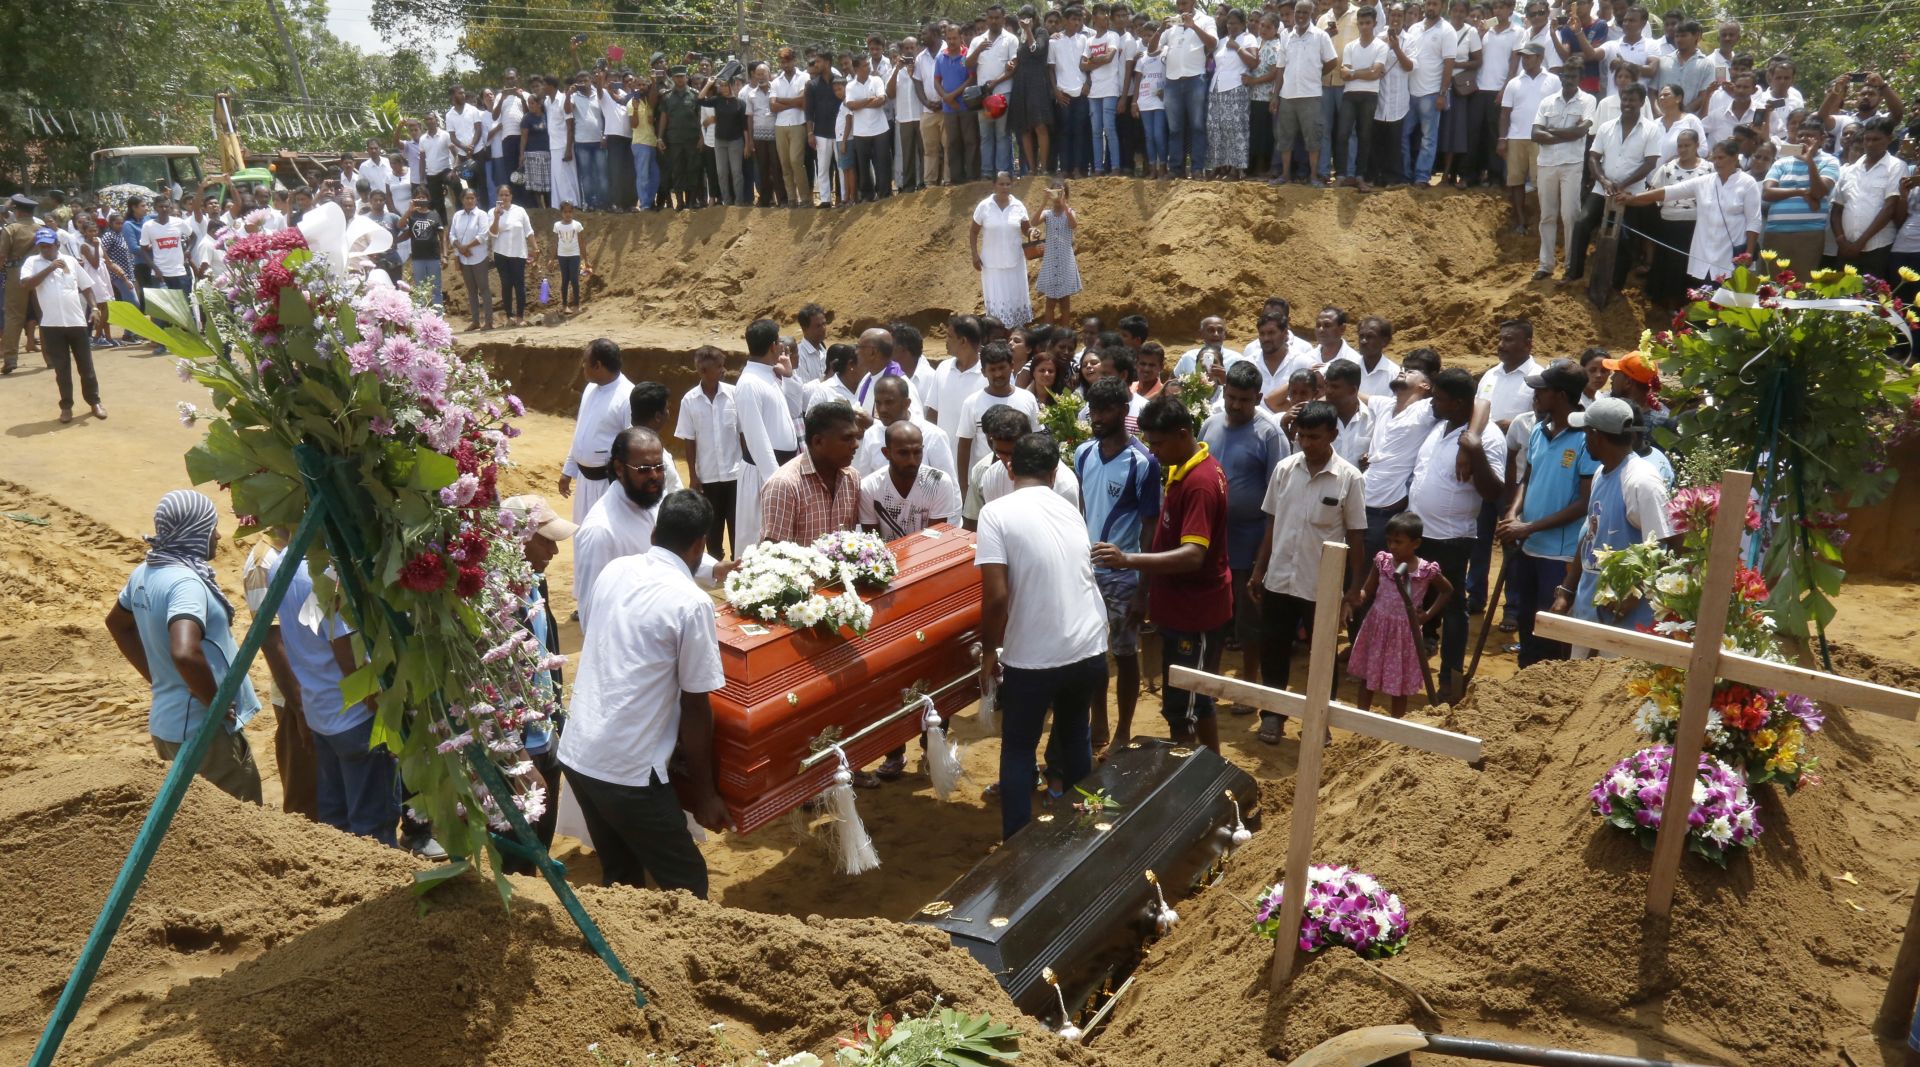 epa07522390 Relatives and friends bury the victims of a series of  bomb blasts at cemetery Don David Katuwapitiya in Colombo, Sri Lanka, 23 April 2019. According to police, at least 290 people were killed and more than 400 injured in a coordinated series of blasts during the Easter Sunday service at churches and hotels in Sri Lanka on 21 April 2019.  EPA/M.A. PUSHPA KUMARA